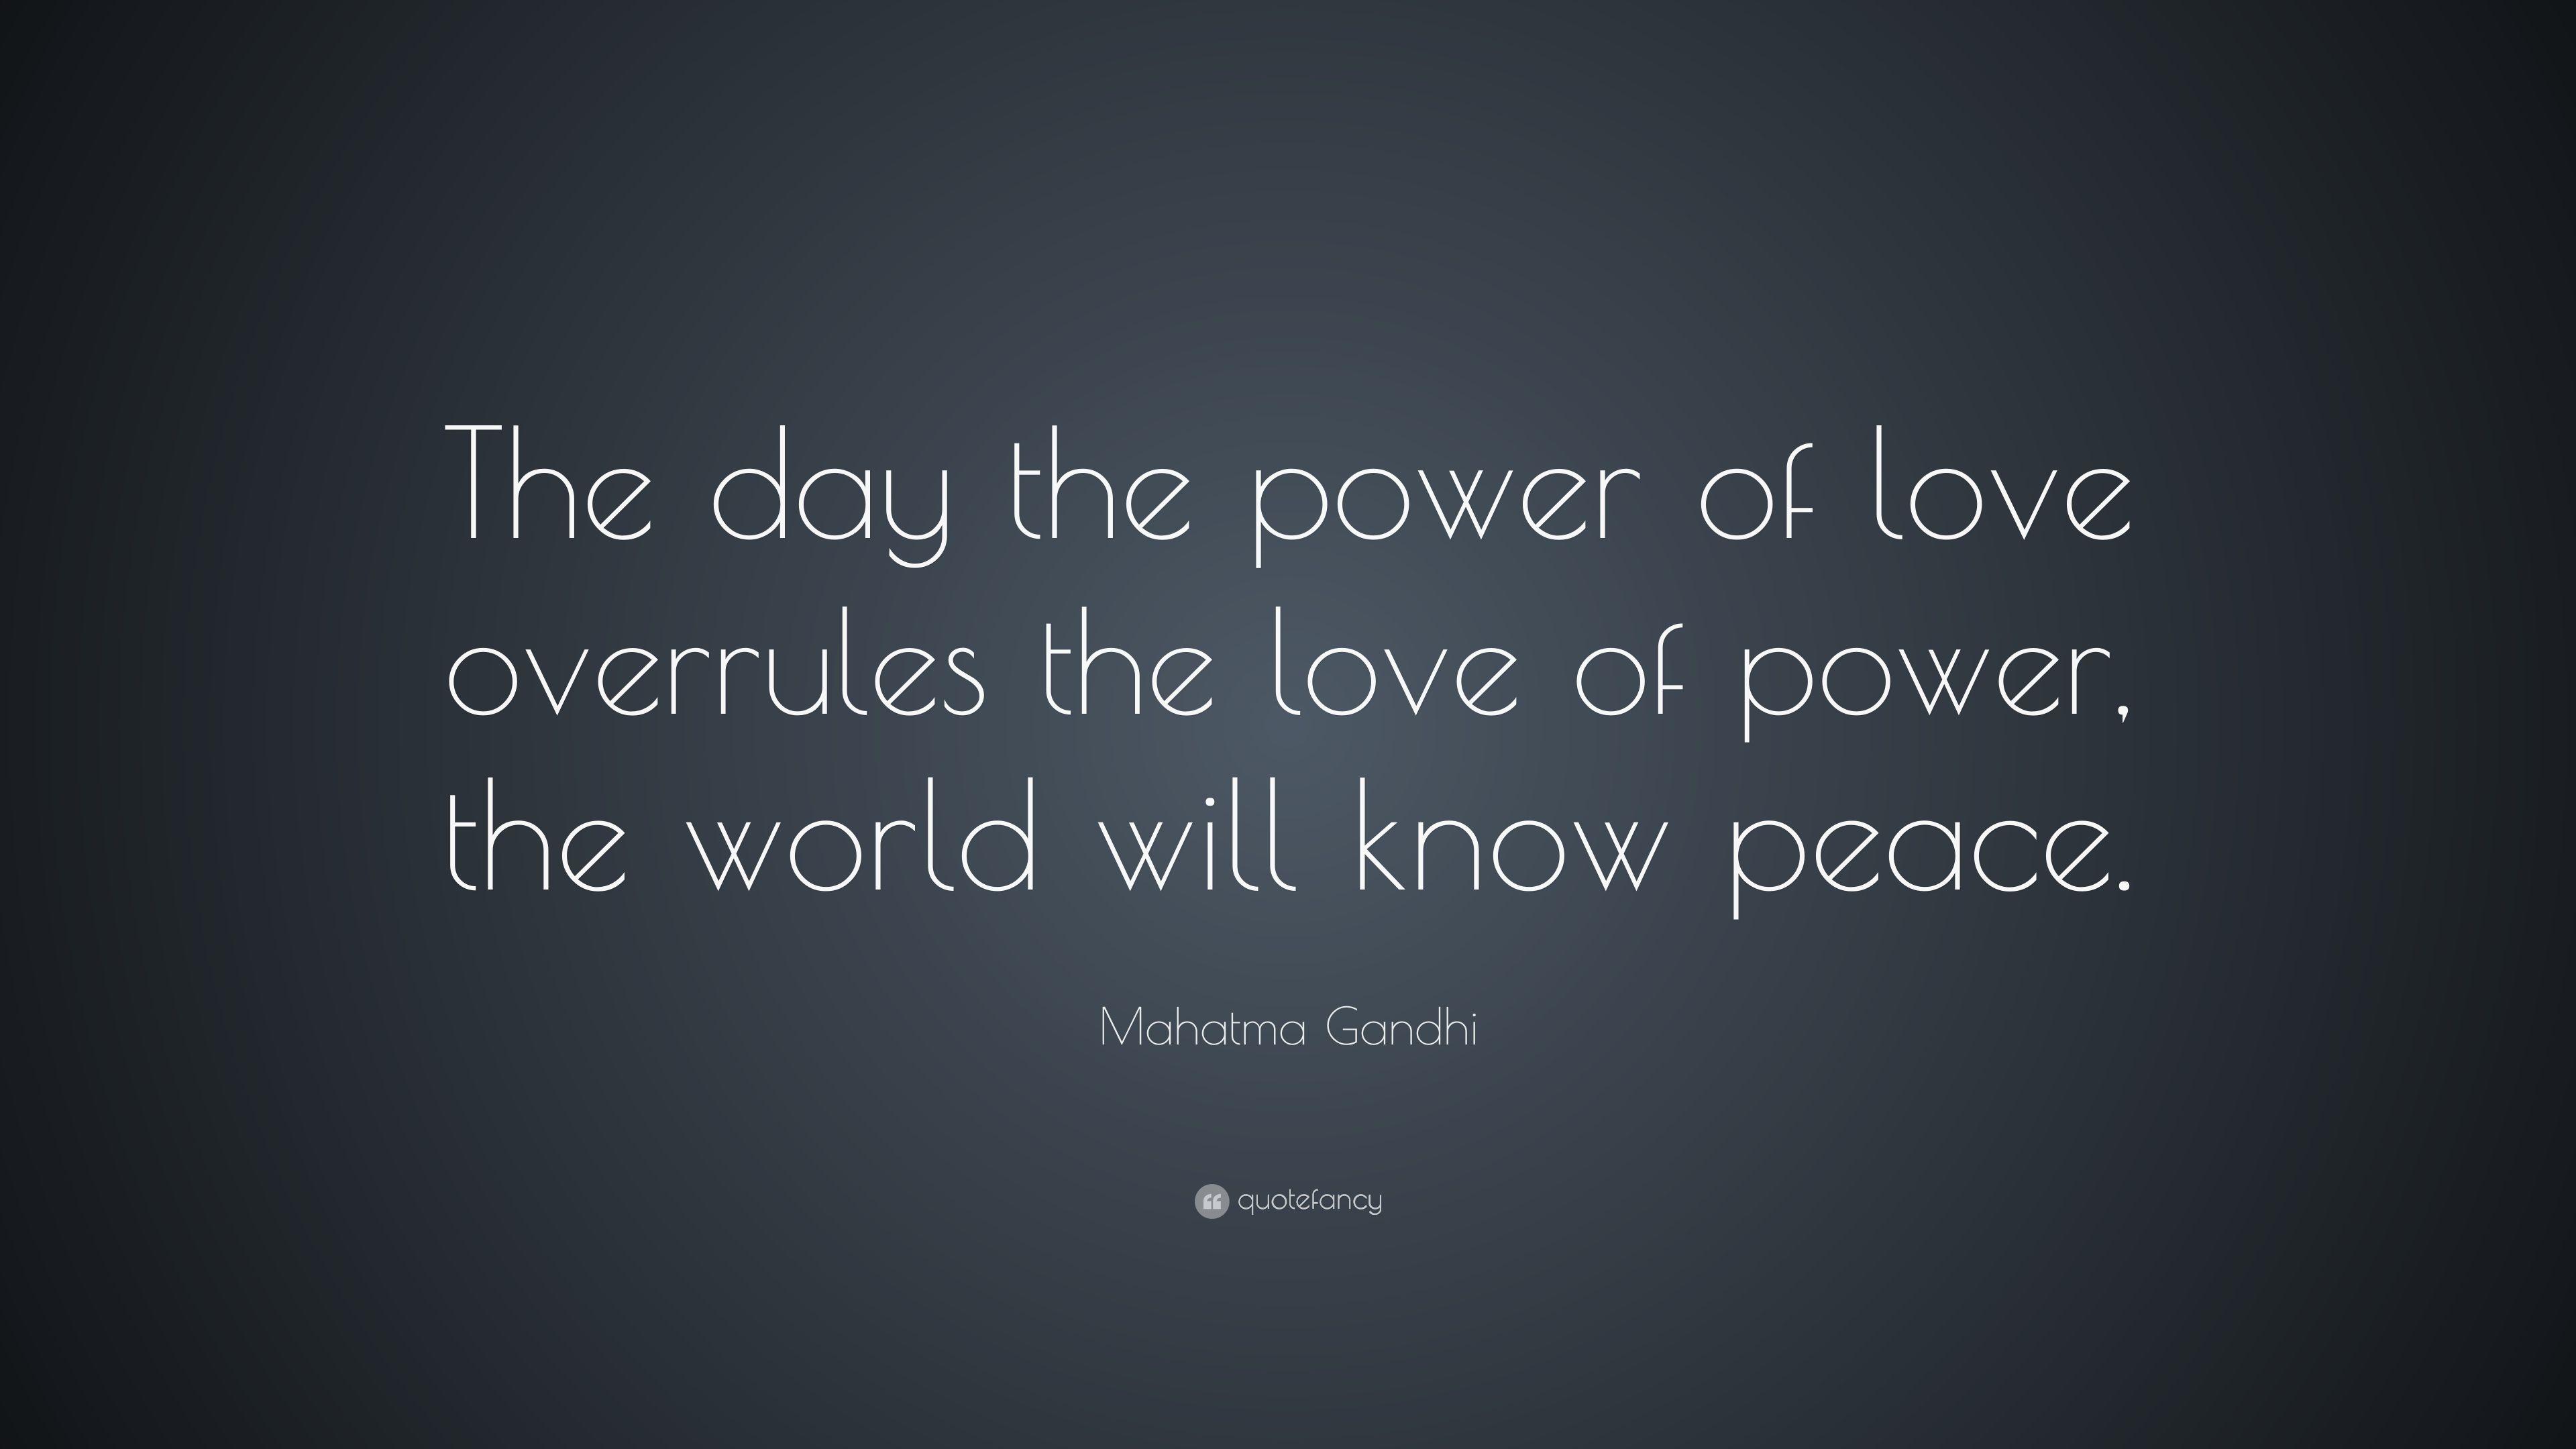 Mahatma Gandhi Quote: “The day the power of love overrules